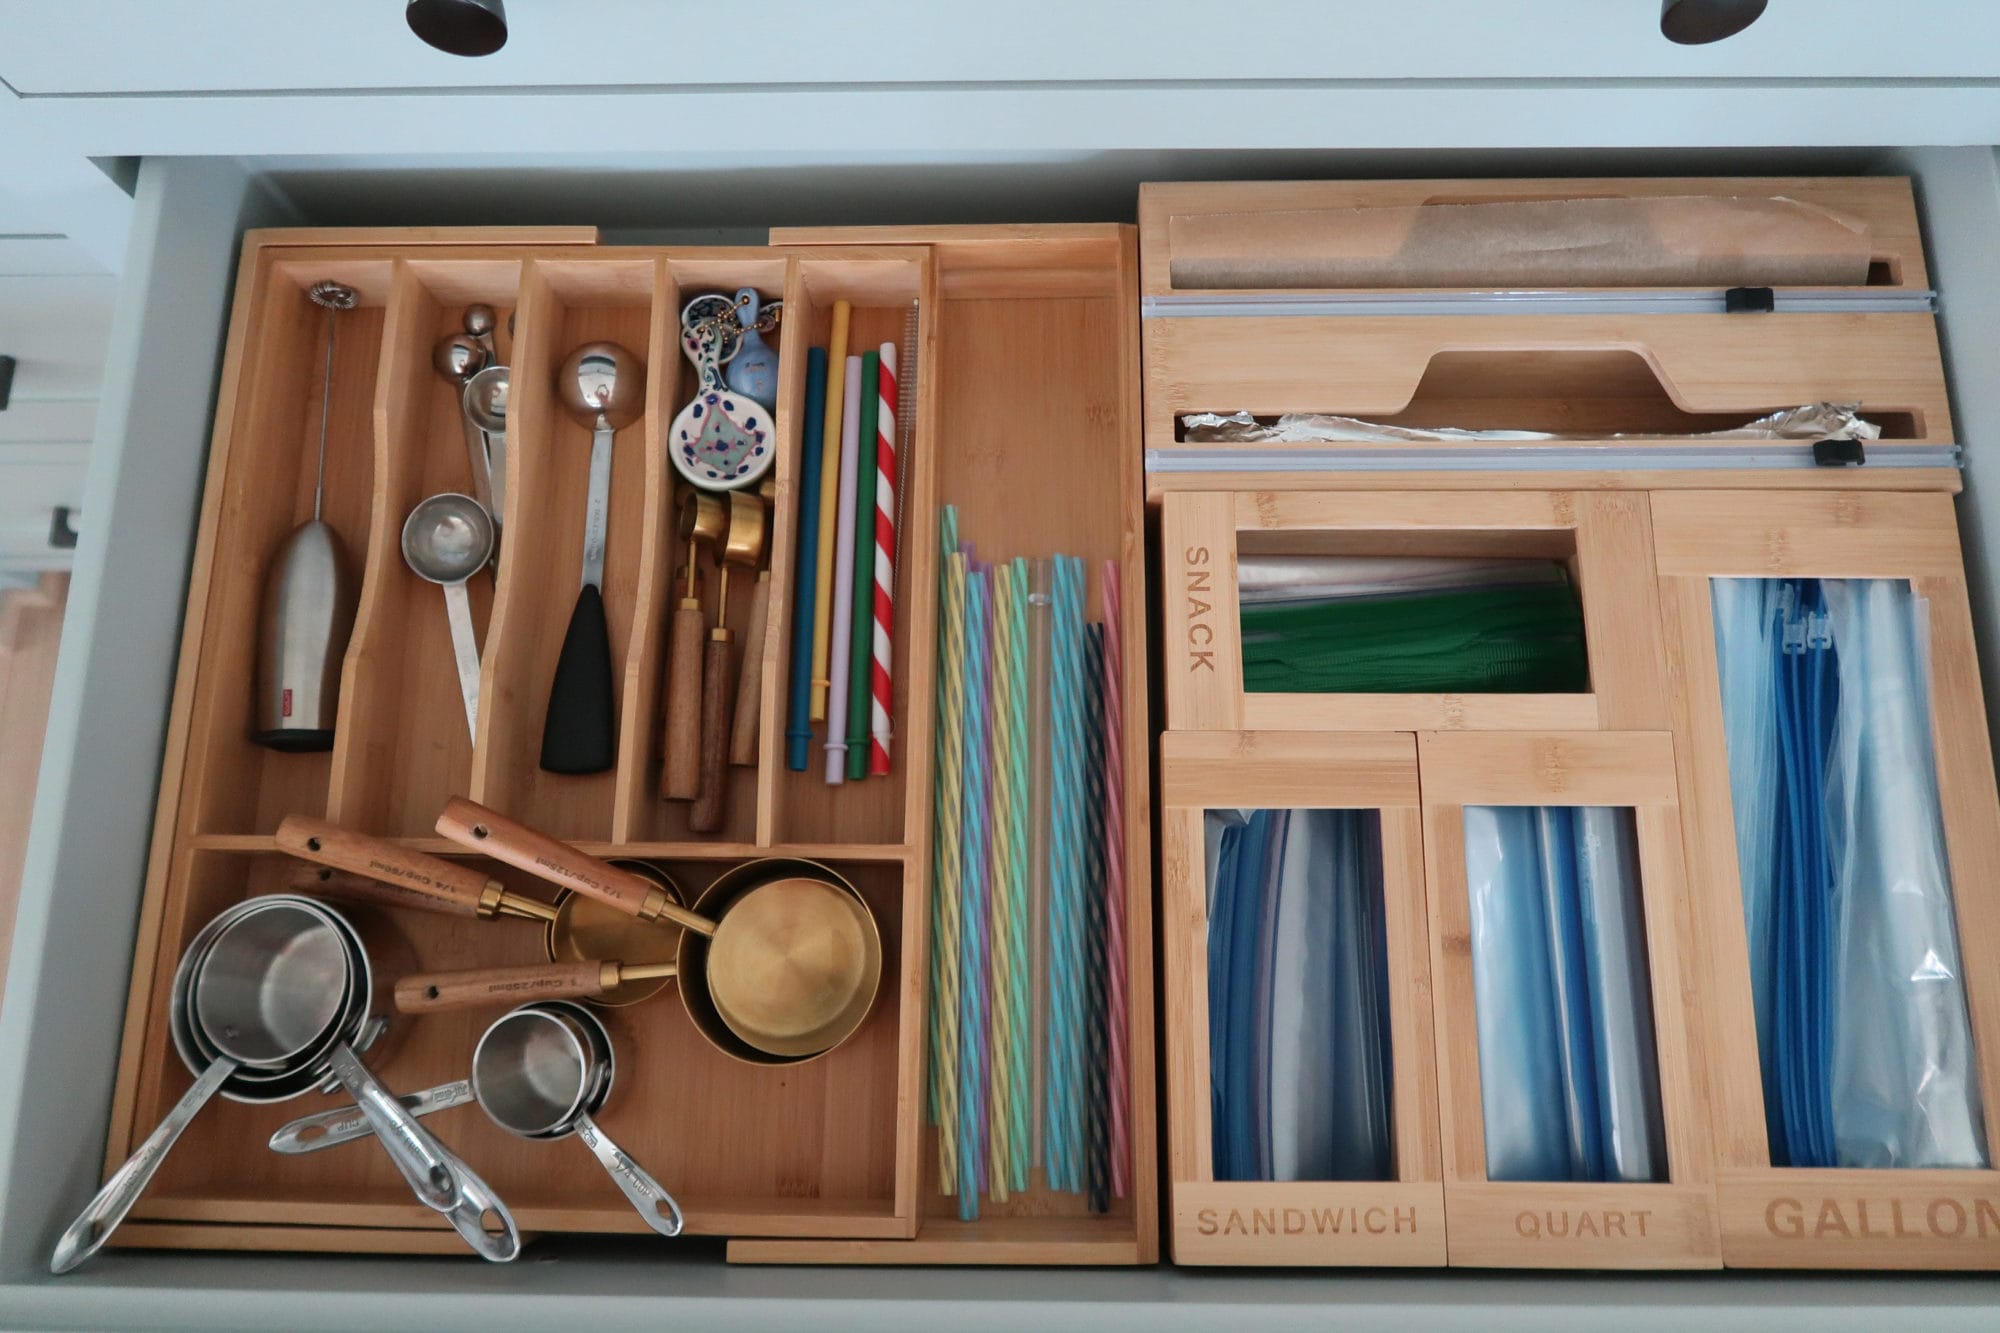 Bamboo Storage for Ziploc and Foil and Utensils